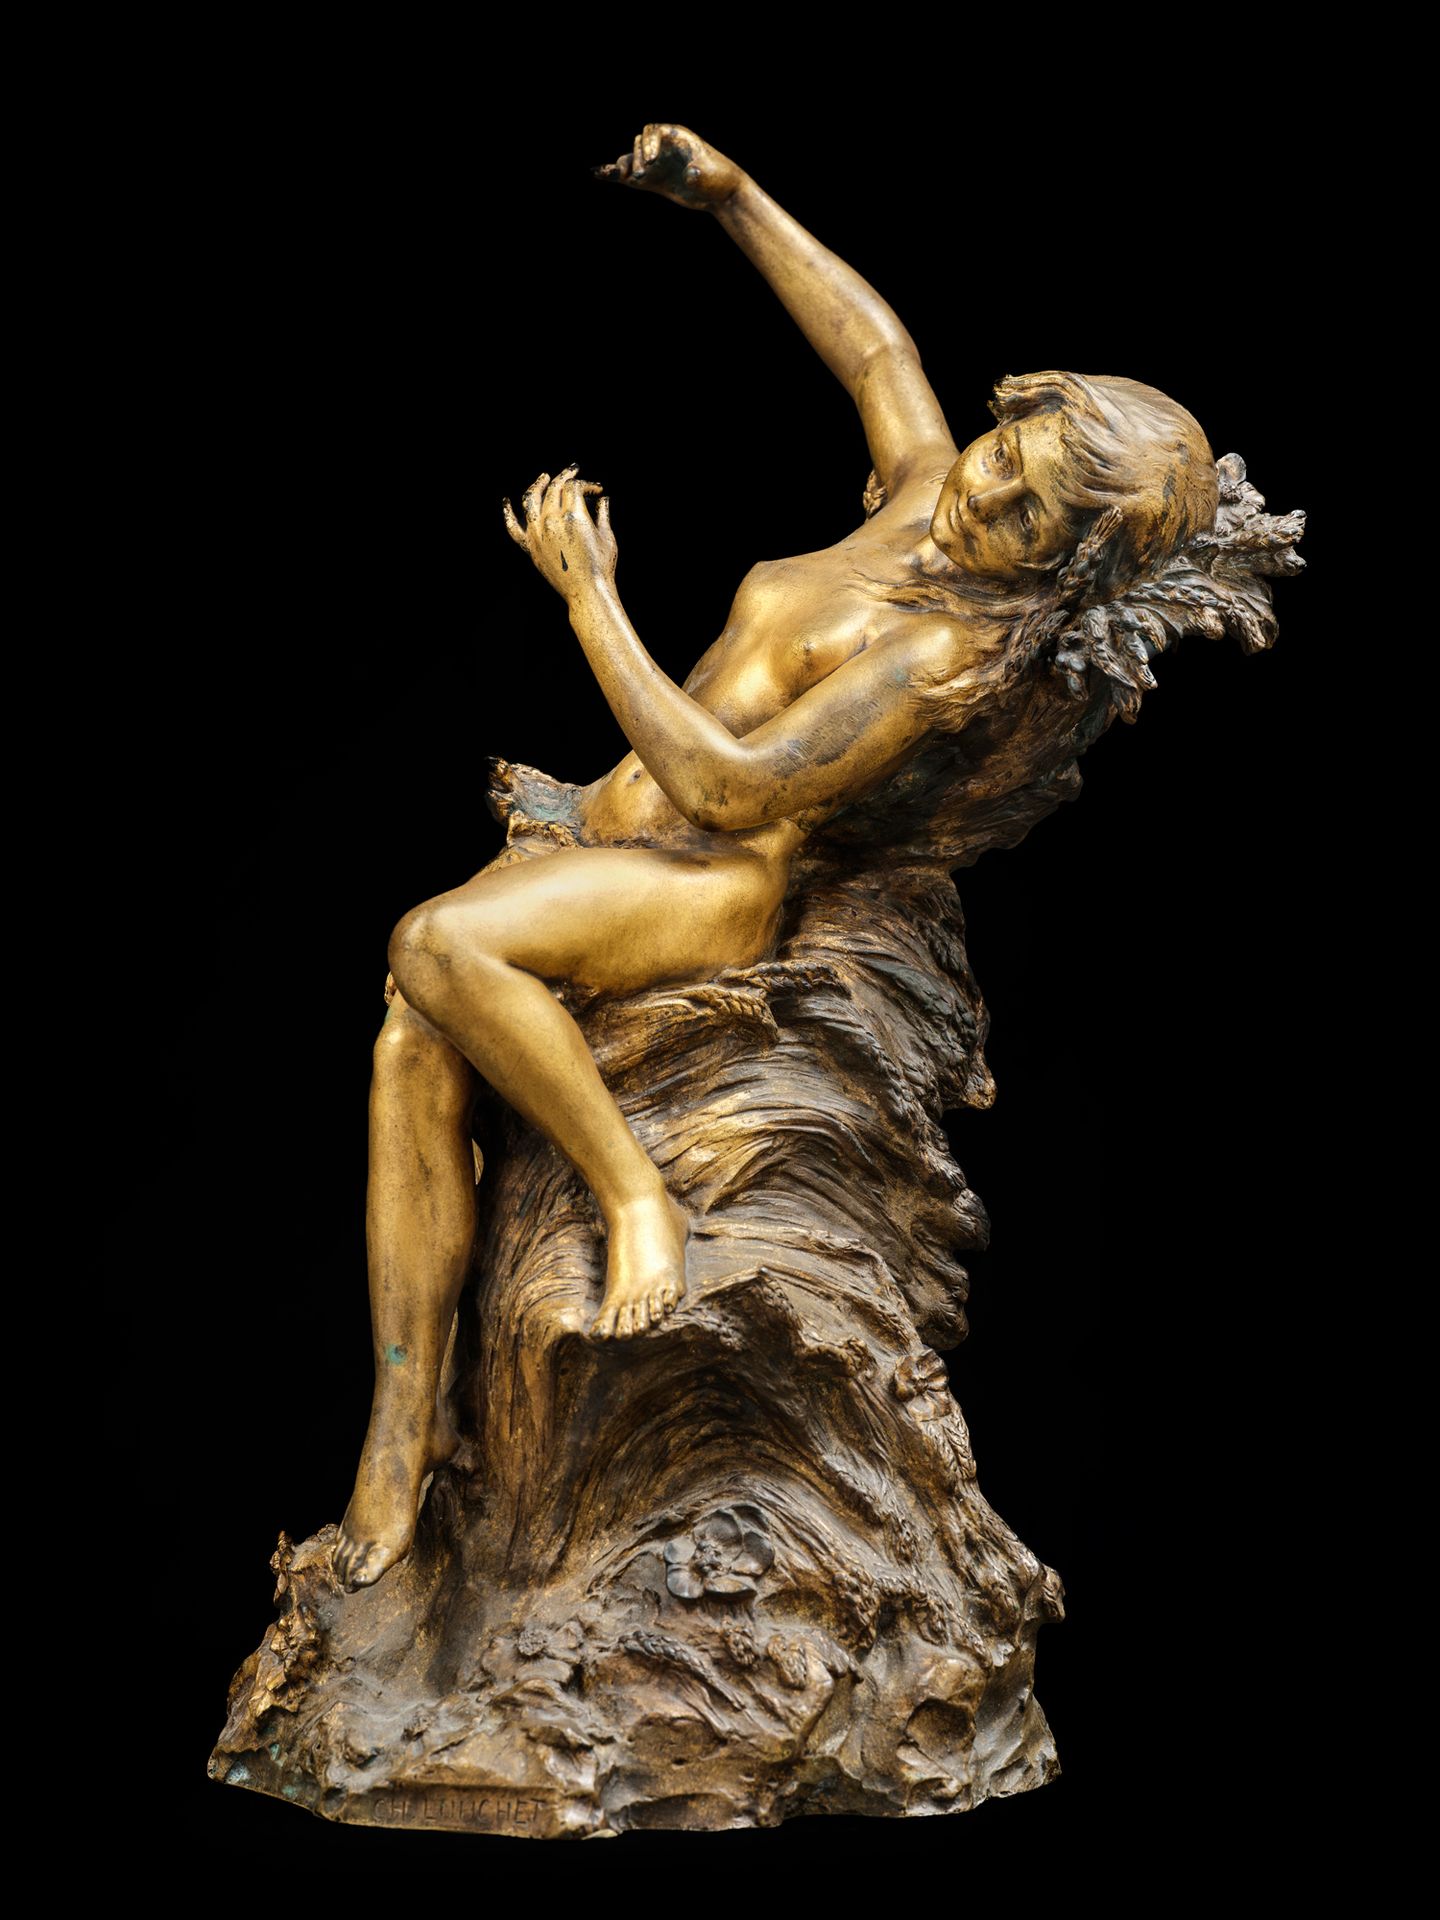 Charles LOUCHET (1854-1936) The metamorphosis
Gilded bronze sculpture
Signed "Ch&hellip;